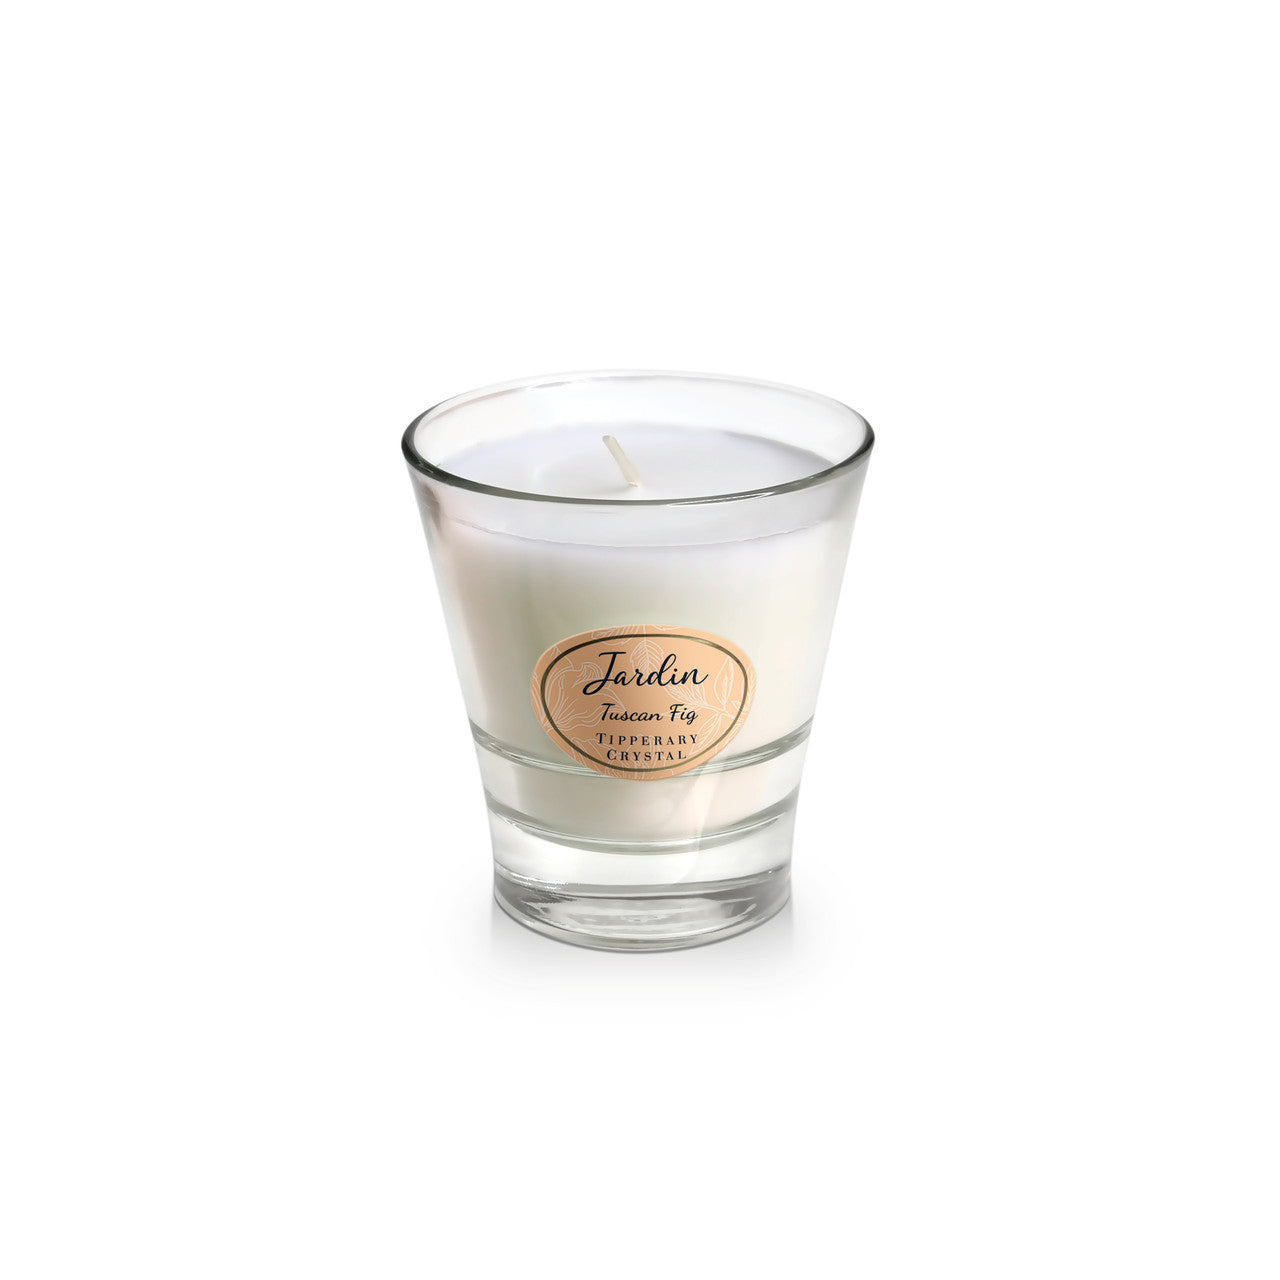 The new Jardin Candle Collection from Tipperary Crystal.  Our luxurious range of fragranced candles are hand poured and hand finished using a natural blend of wax and a lead-free cotton braided wick to ensure a clean, toxin-free burn in your home. Each fragrance is made using the essence of essential oils and has a maximum of 40-45 hours burn time.